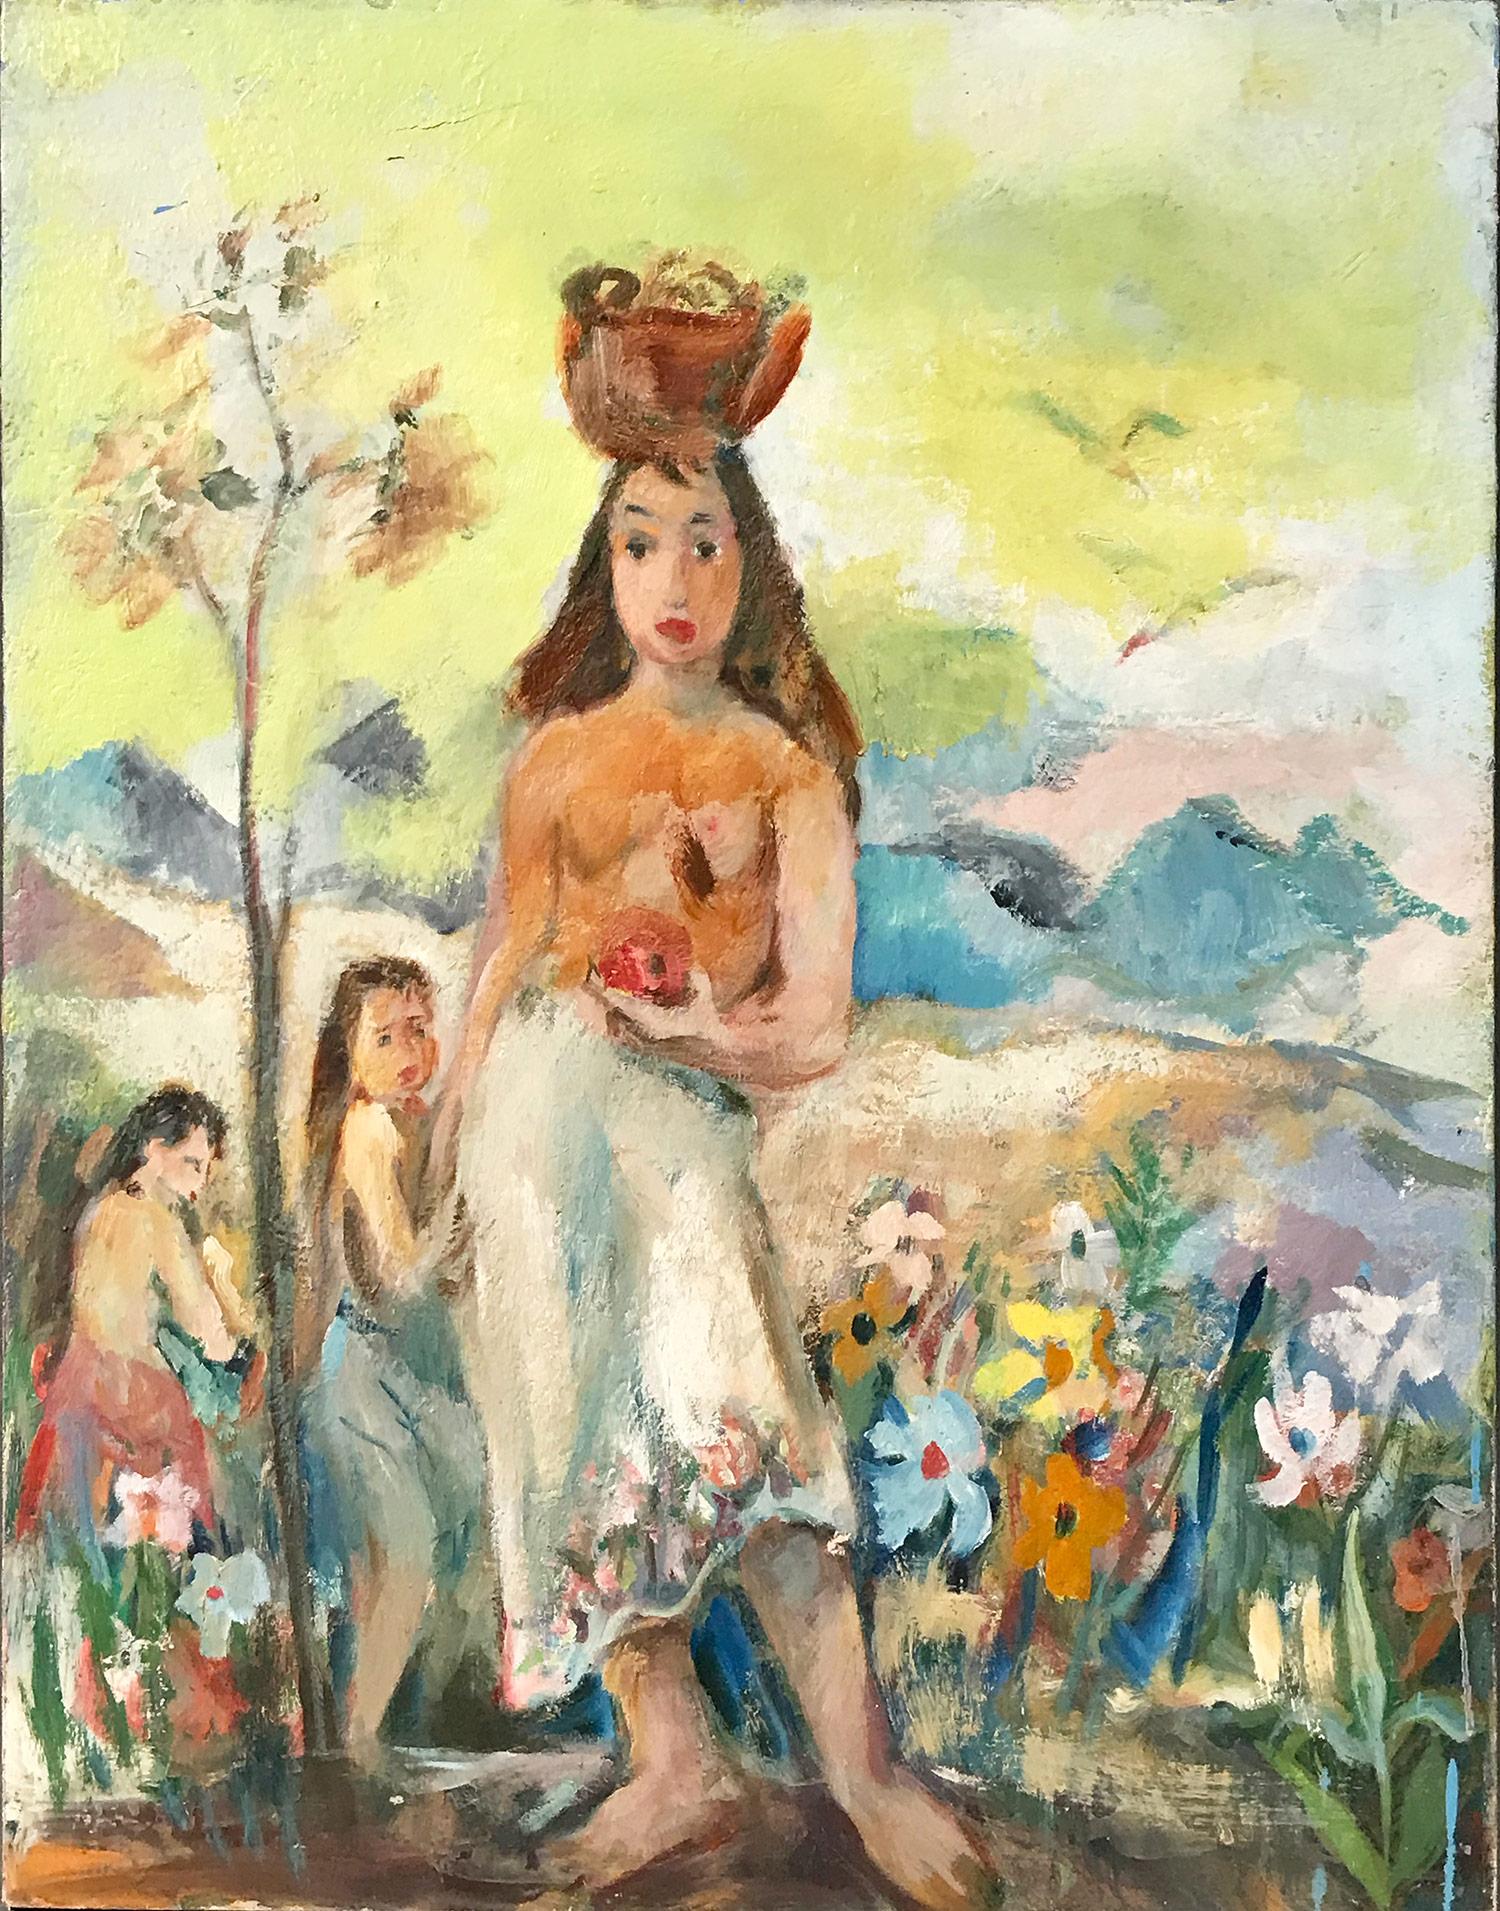 Unknown Figurative Painting - "In the Brush" Mid Century Oil Painting of Figures & Flowers Landscape